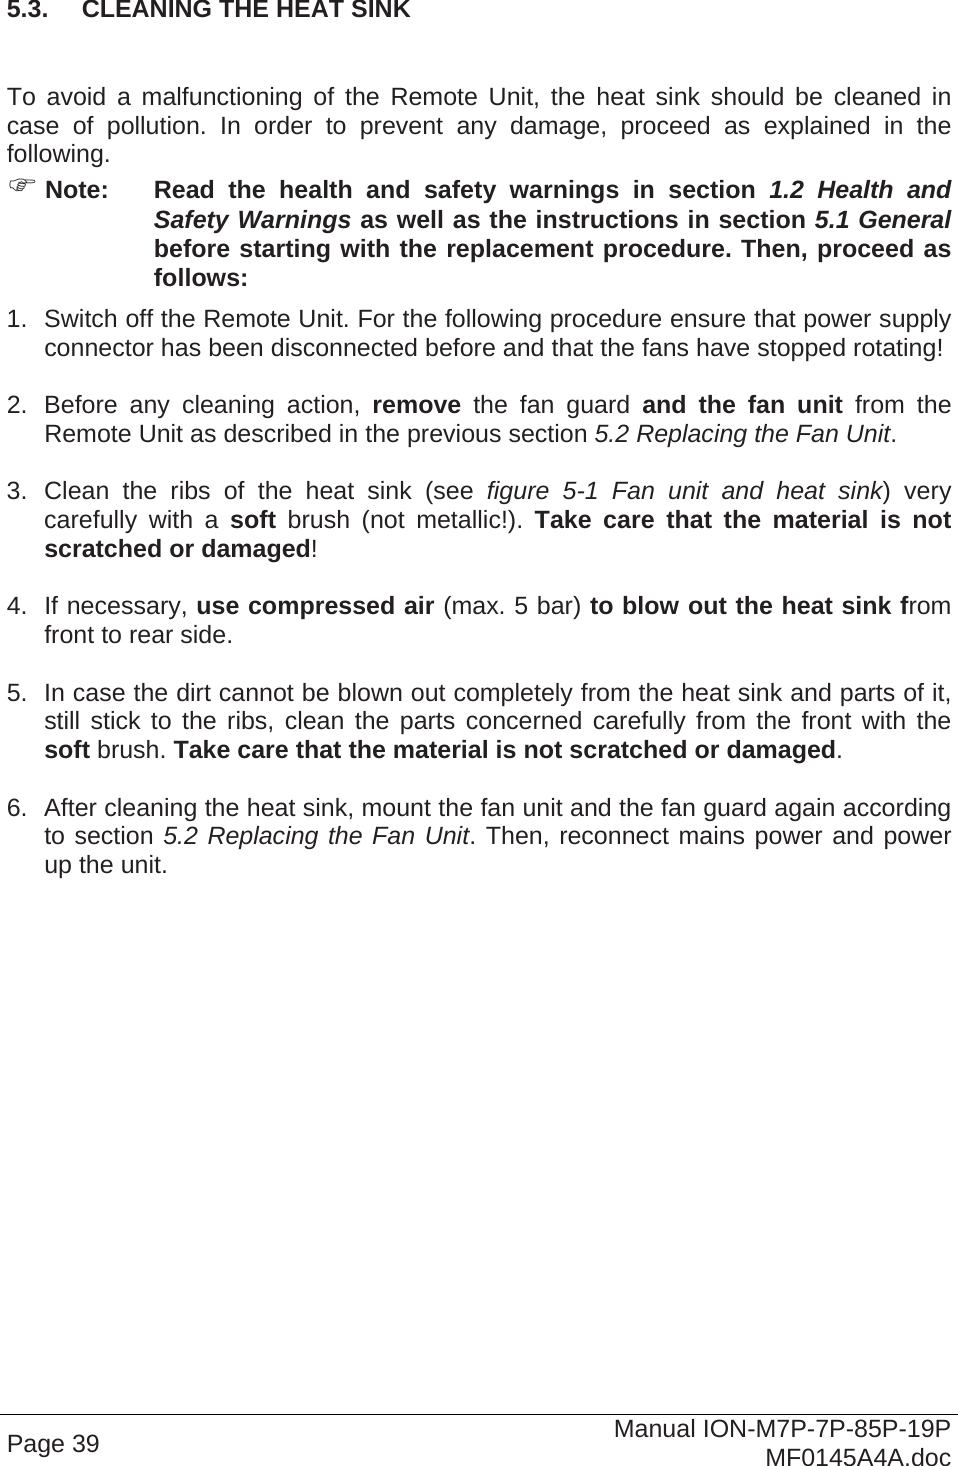  Page 39  Manual ION-M7P-7P-85P-19P MF0145A4A.doc 5.3.  CLEANING THE HEAT SINK   To avoid a malfunctioning of the Remote Unit, the heat sink should be cleaned in case of pollution. In order to prevent any damage, proceed as explained in the following.  Note:  Read the health and safety warnings in section 1.2 Health and Safety Warnings as well as the instructions in section 5.1 General before starting with the replacement procedure. Then, proceed as follows: 1.  Switch off the Remote Unit. For the following procedure ensure that power supply connector has been disconnected before and that the fans have stopped rotating!  2.  Before any cleaning action, remove the fan guard and the fan unit from the Remote Unit as described in the previous section 5.2 Replacing the Fan Unit.   3. Clean the ribs of the heat sink (see figure 5-1 Fan unit and heat sink) very carefully with a soft brush (not metallic!). Take care that the material is not scratched or damaged!  4. If necessary, use compressed air (max. 5 bar) to blow out the heat sink from front to rear side.  5.  In case the dirt cannot be blown out completely from the heat sink and parts of it, still stick to the ribs, clean the parts concerned carefully from the front with the soft brush. Take care that the material is not scratched or damaged.  6.  After cleaning the heat sink, mount the fan unit and the fan guard again according to section 5.2 Replacing the Fan Unit. Then, reconnect mains power and power up the unit.   